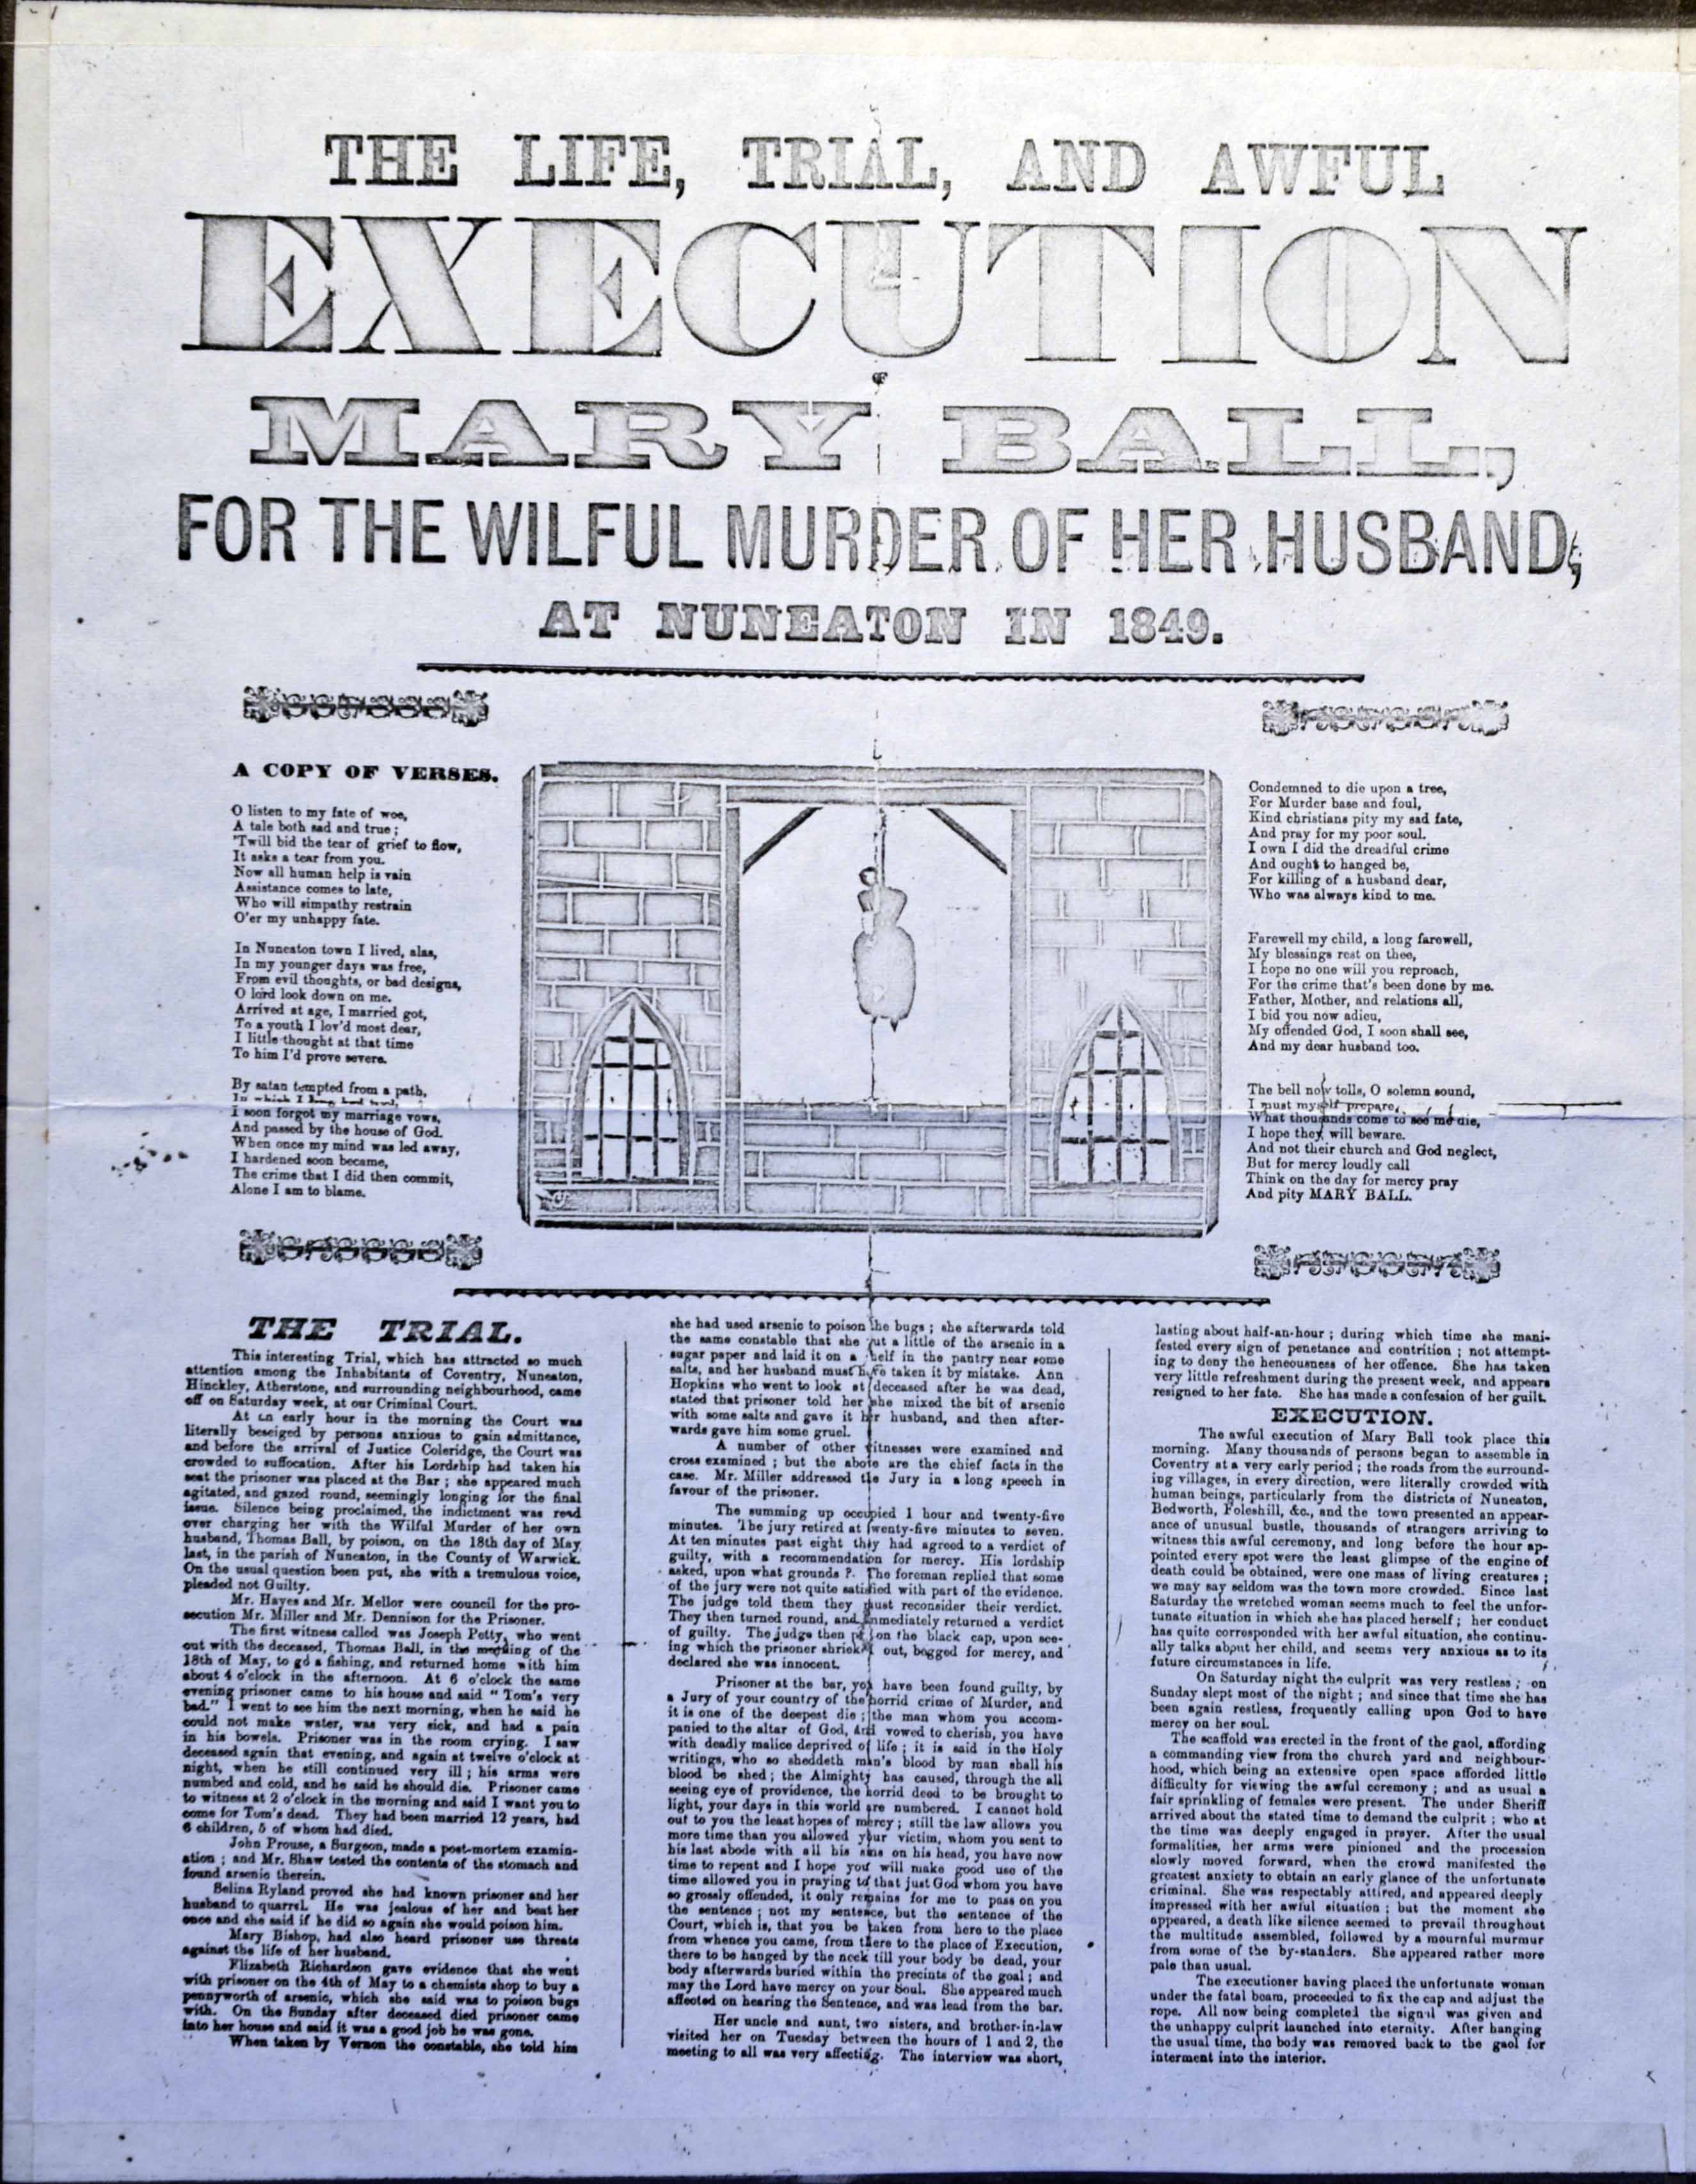 A newspaper story reporting on the hanging of Mary Ball in 1849